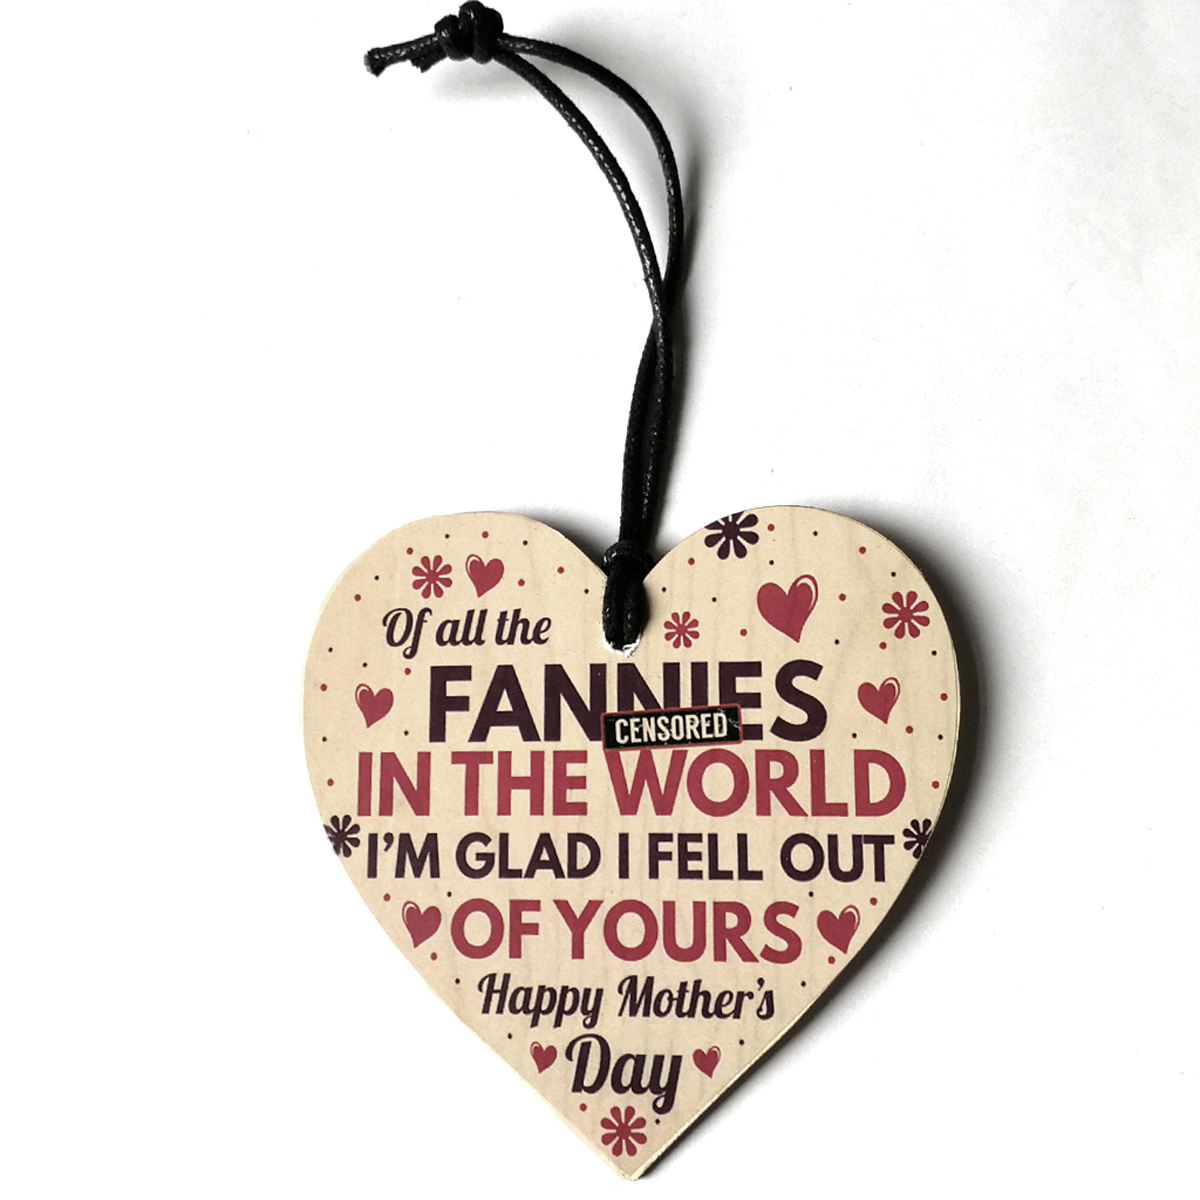 Wooden-Heart-Plaque-Funny-Rude-Mothers-Day-Heart-Gifts-Novelty-Daughter-Son-Decorations-1456823-7